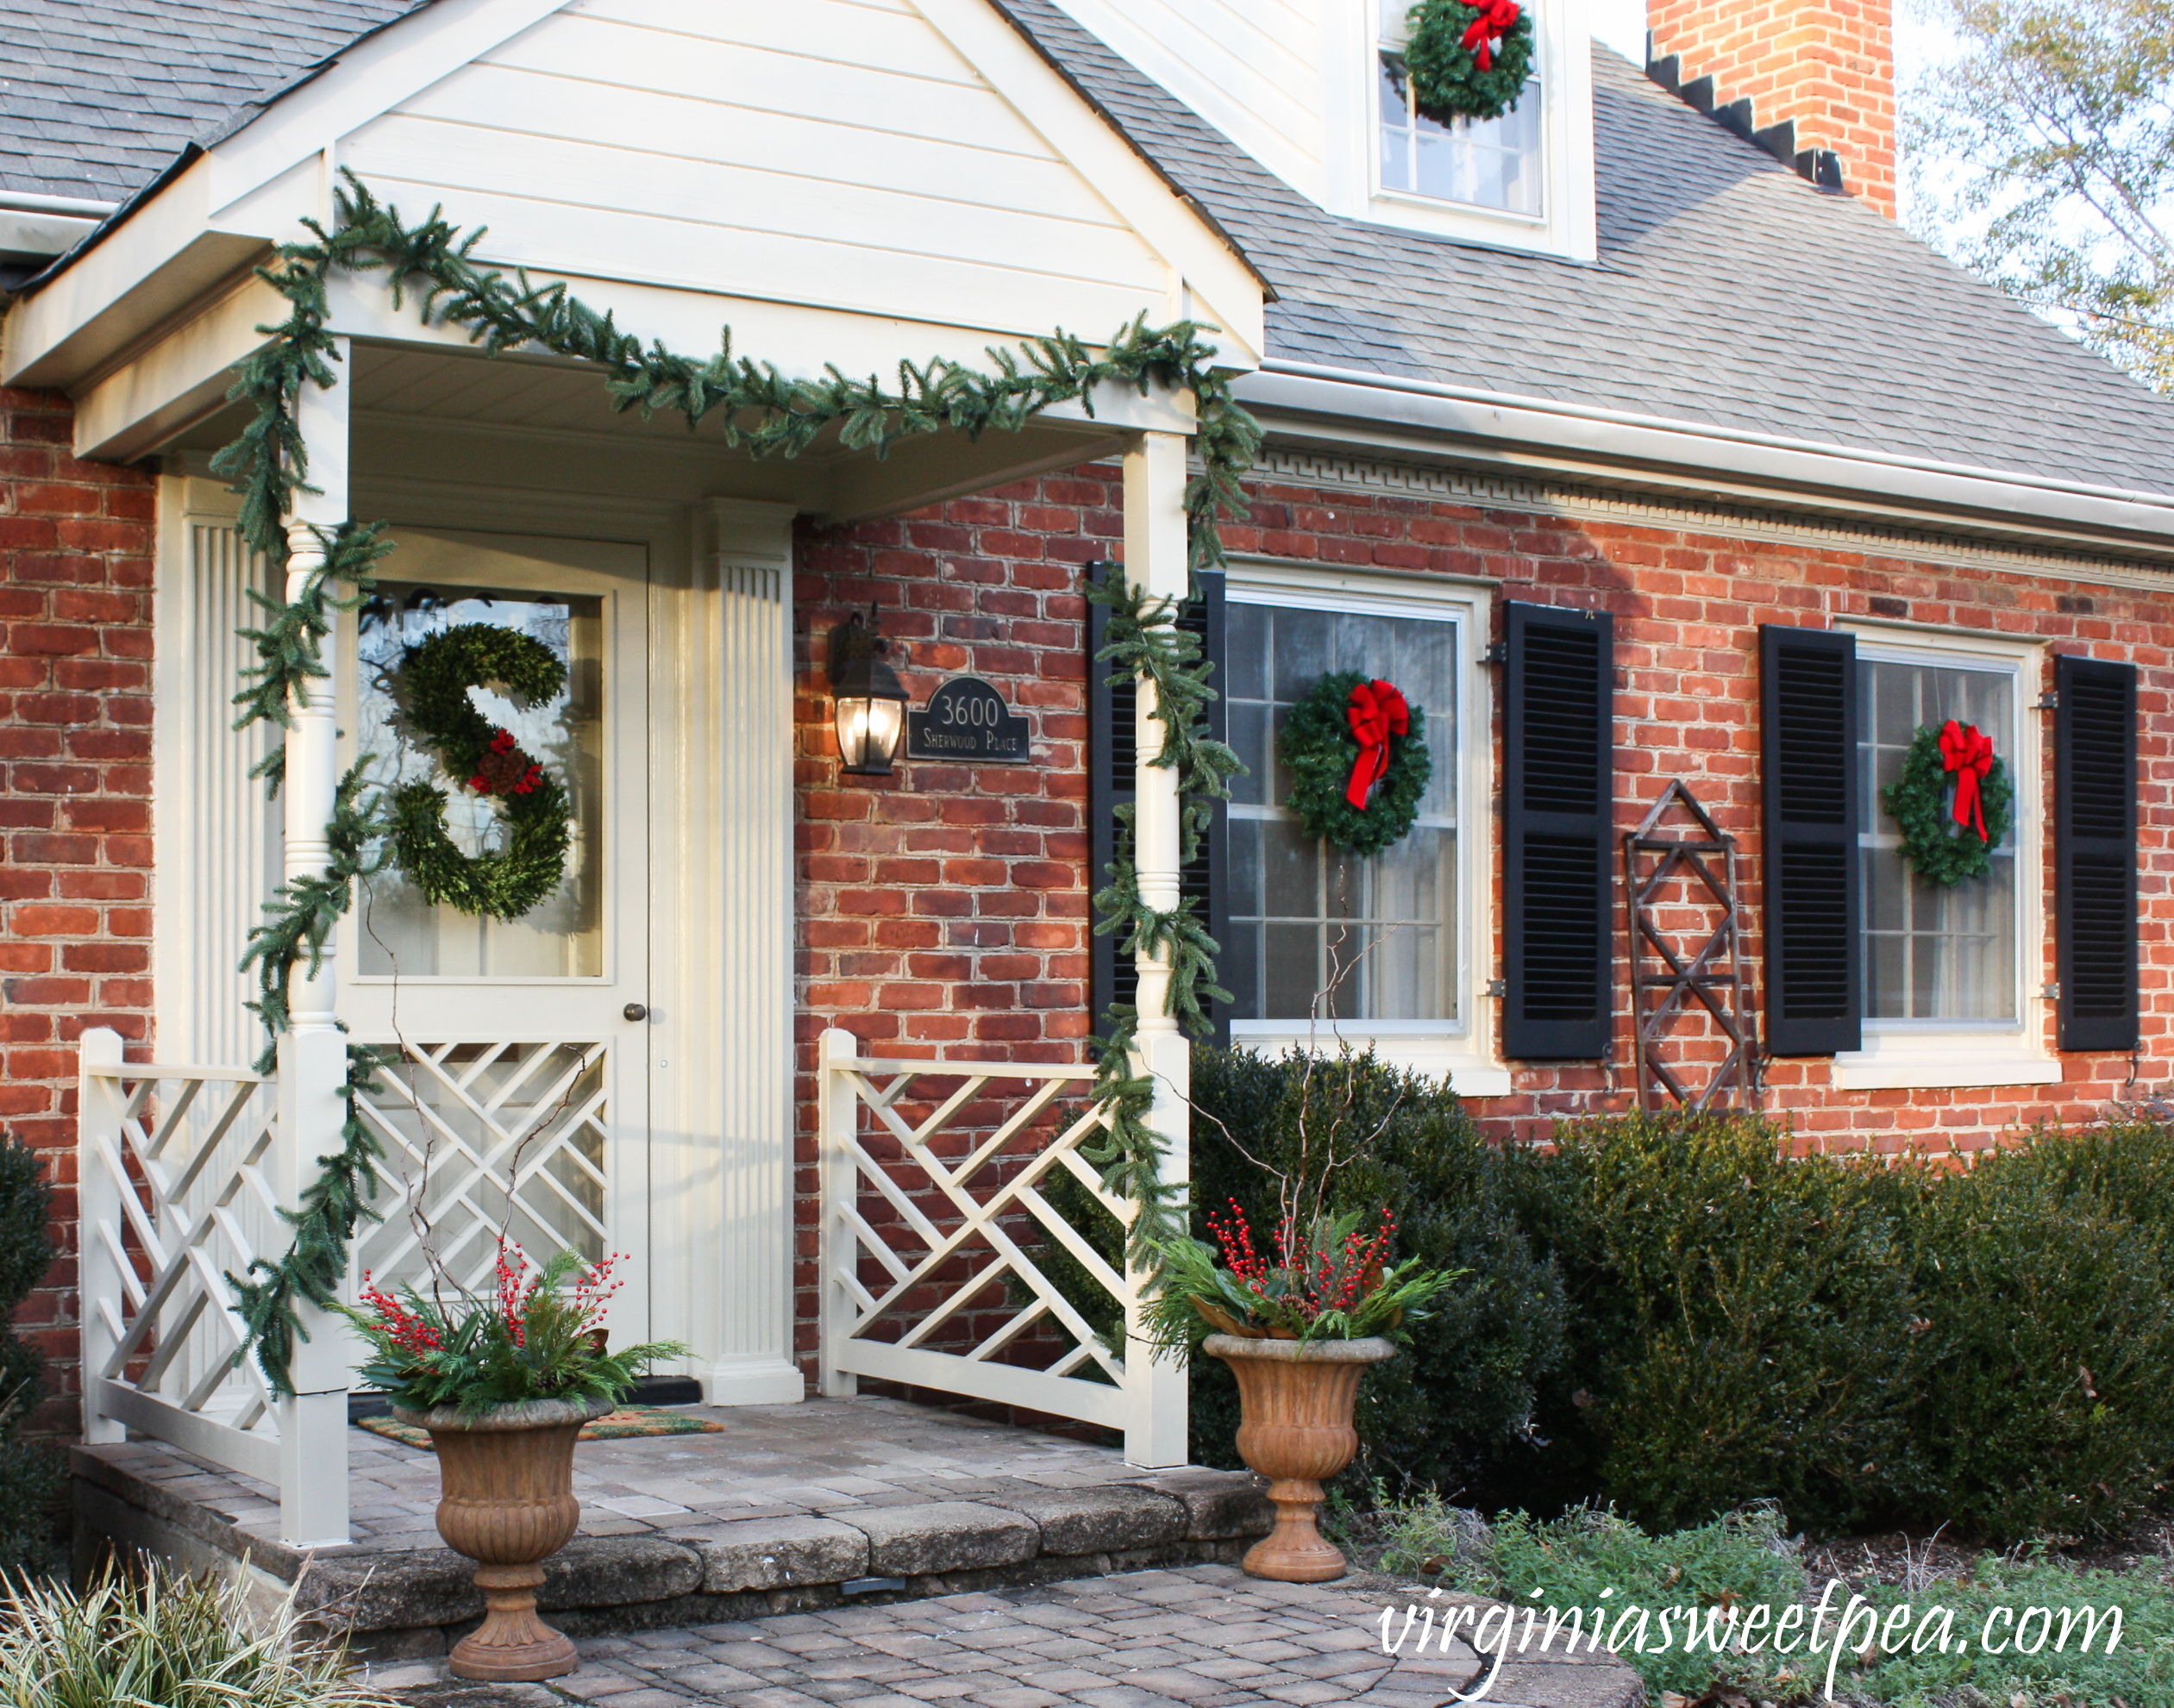 Christmas Front Porch and Holiday Door Decor - Get ideas for decorating your porch and doors for Christmas. #christmas #christmaswreath #christmasdoors #christmasoutdoors #christmasdecor